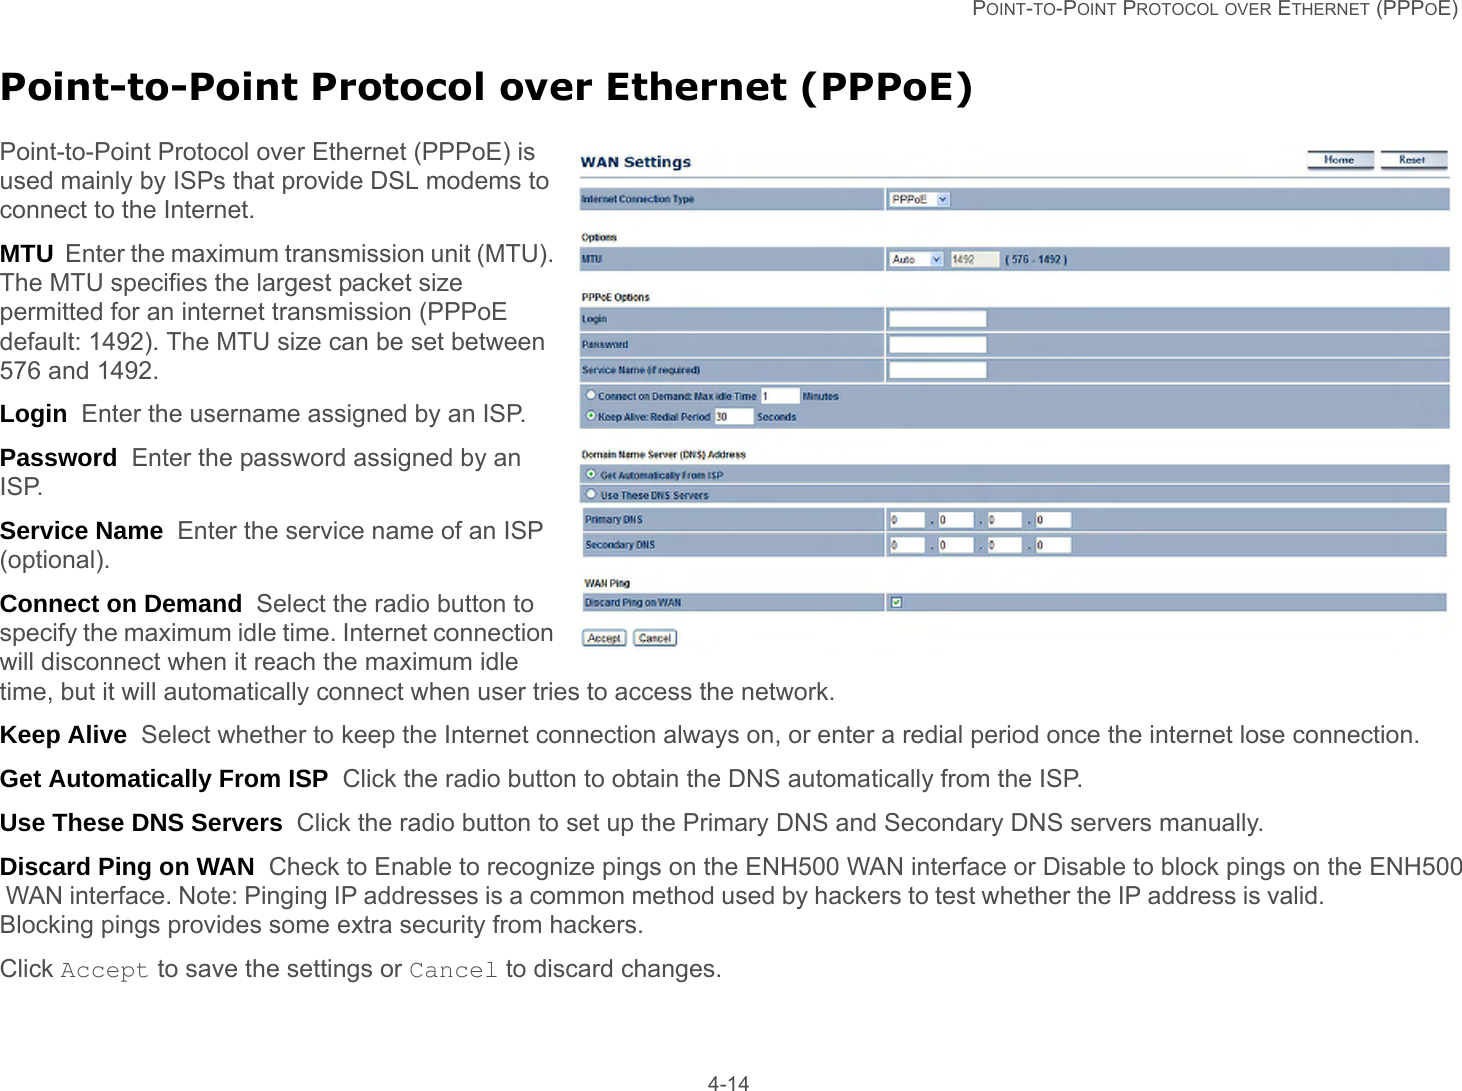   POINT-TO-POINT PROTOCOL OVER ETHERNET (PPPOE) 4-14Point-to-Point Protocol over Ethernet (PPPoE)Point-to-Point Protocol over Ethernet (PPPoE) is used mainly by ISPs that provide DSL modems to connect to the Internet.MTU  Enter the maximum transmission unit (MTU). The MTU specifies the largest packet size permitted for an internet transmission (PPPoE default: 1492). The MTU size can be set between 576 and 1492.Login  Enter the username assigned by an ISP.Password  Enter the password assigned by an ISP.Service Name  Enter the service name of an ISP (optional).Connect on Demand  Select the radio button to specify the maximum idle time. Internet connection will disconnect when it reach the maximum idle time, but it will automatically connect when user tries to access the network.Keep Alive  Select whether to keep the Internet connection always on, or enter a redial period once the internet lose connection.Get Automatically From ISP  Click the radio button to obtain the DNS automatically from the ISP.Use These DNS Servers  Click the radio button to set up the Primary DNS and Secondary DNS servers manually.Discard Ping on WAN  Check to Enable to recognize pings on the ENH500 WAN interface or Disable to block pings on the ENH500 WAN interface. Note: Pinging IP addresses is a common method used by hackers to test whether the IP address is valid. Blocking pings provides some extra security from hackers.Click Accept to save the settings or Cancel to discard changes.